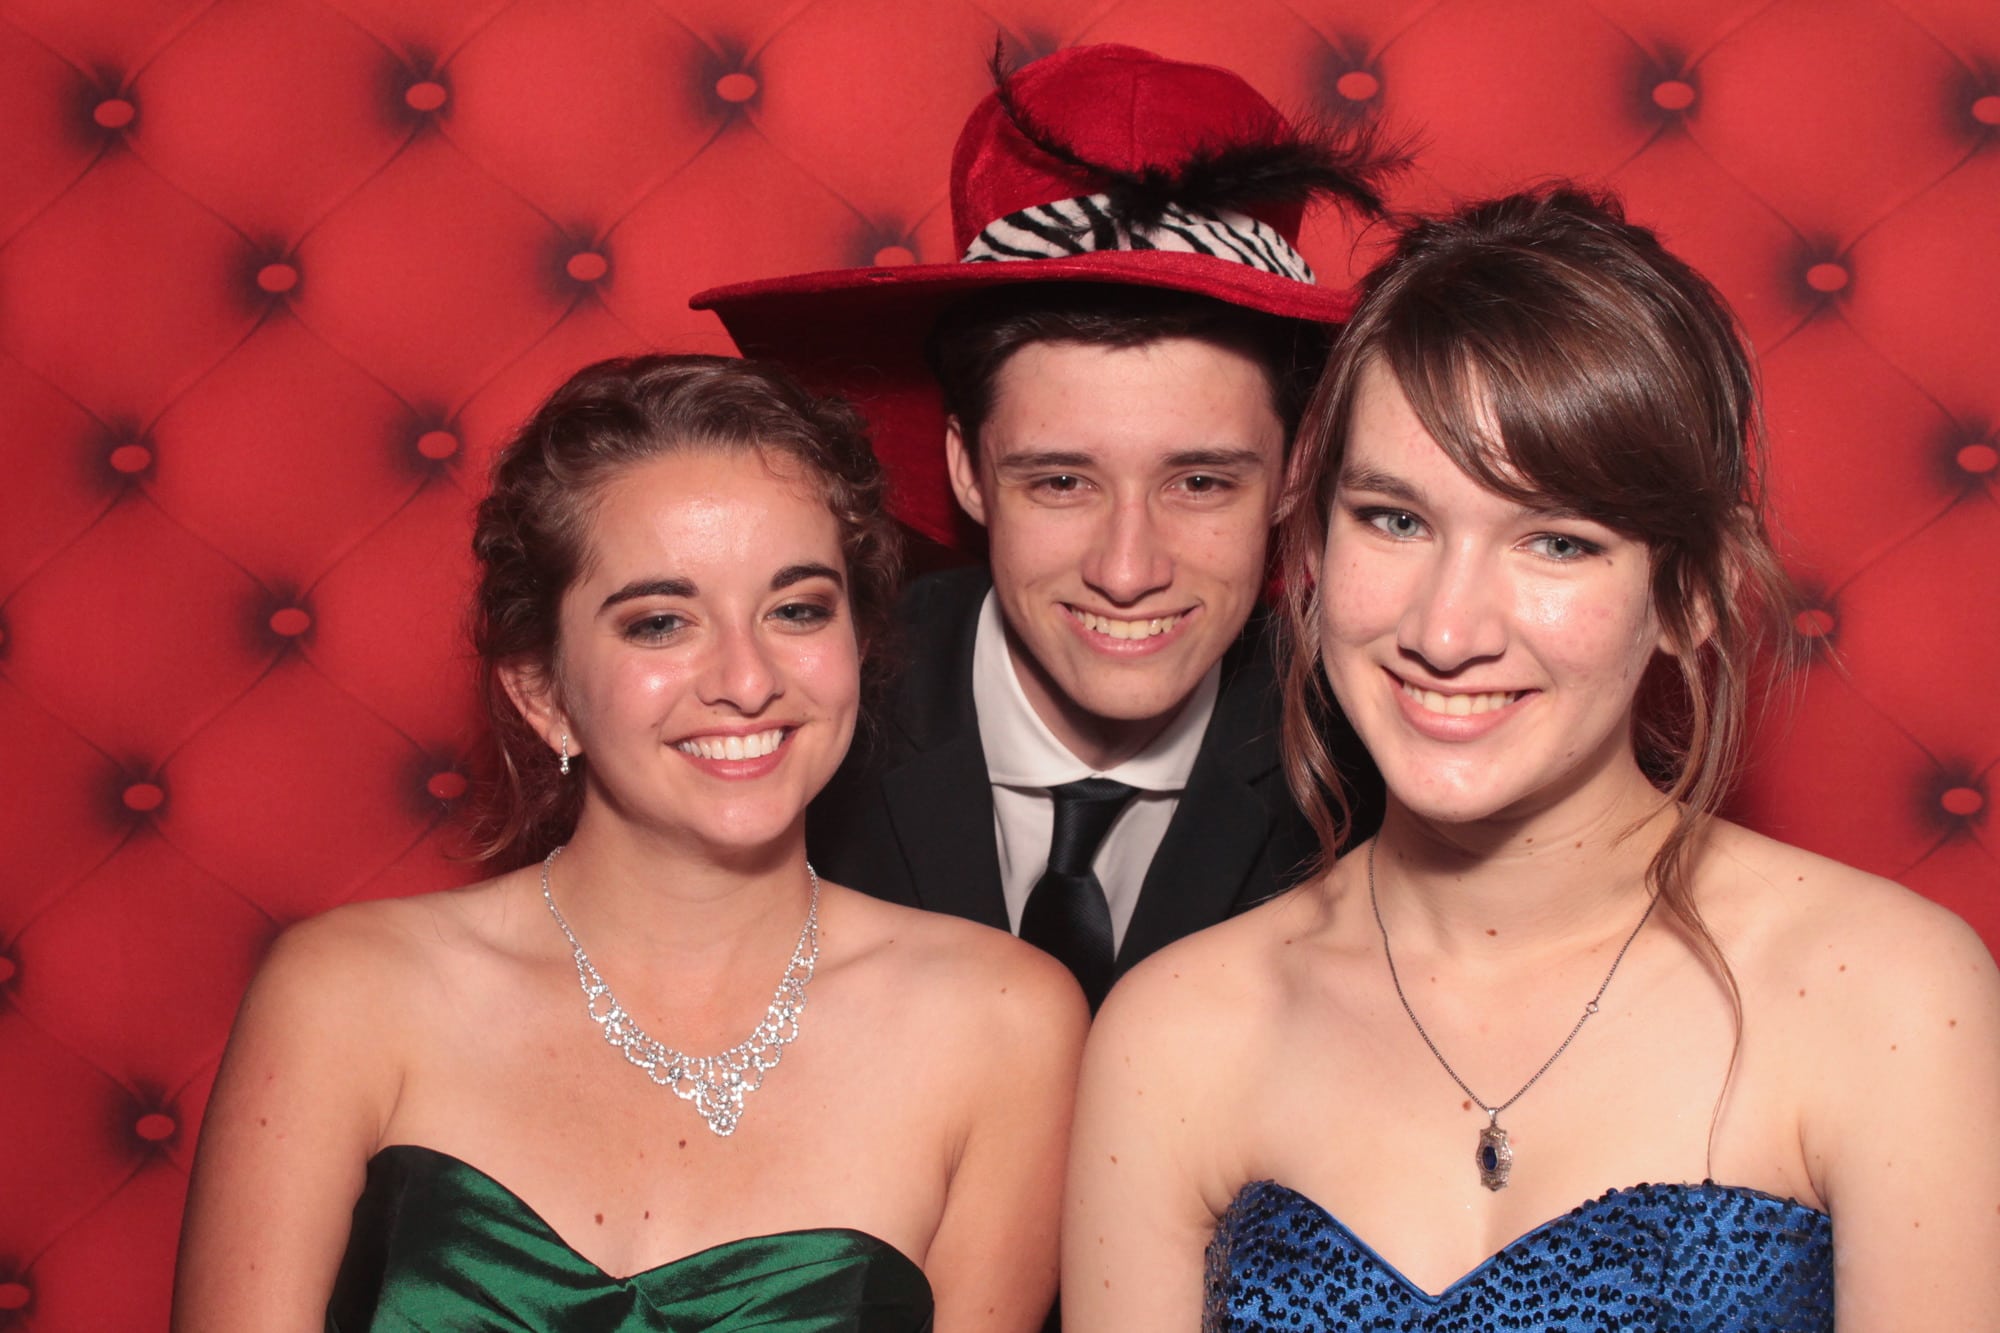 Photo Booth-Rental-High School-Prom-Dance-Students-No. 1-Portraits-Fun-Entertainment-Austin-Central-Texas-Hill Country